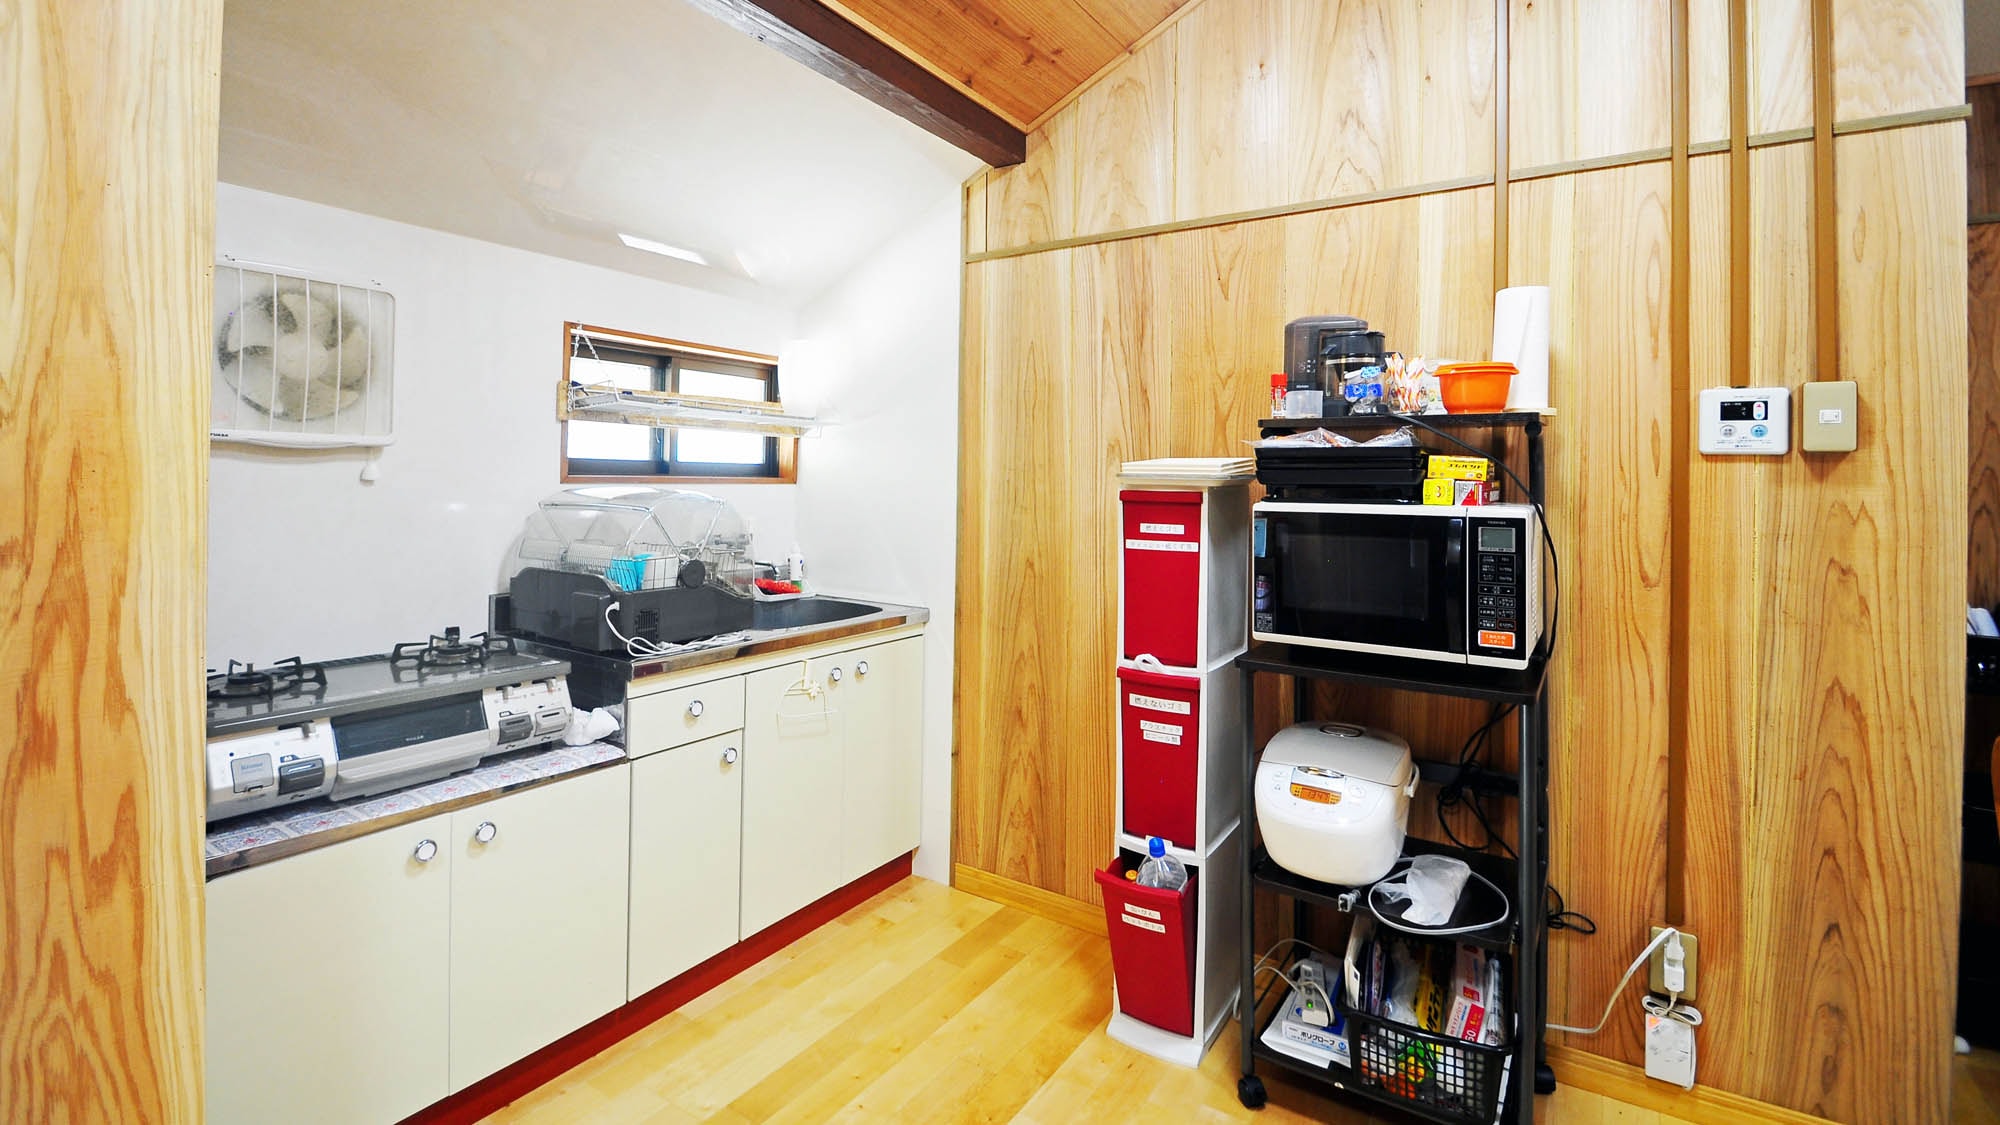 [Kitchen] Rice cooker and microwave oven are also available.